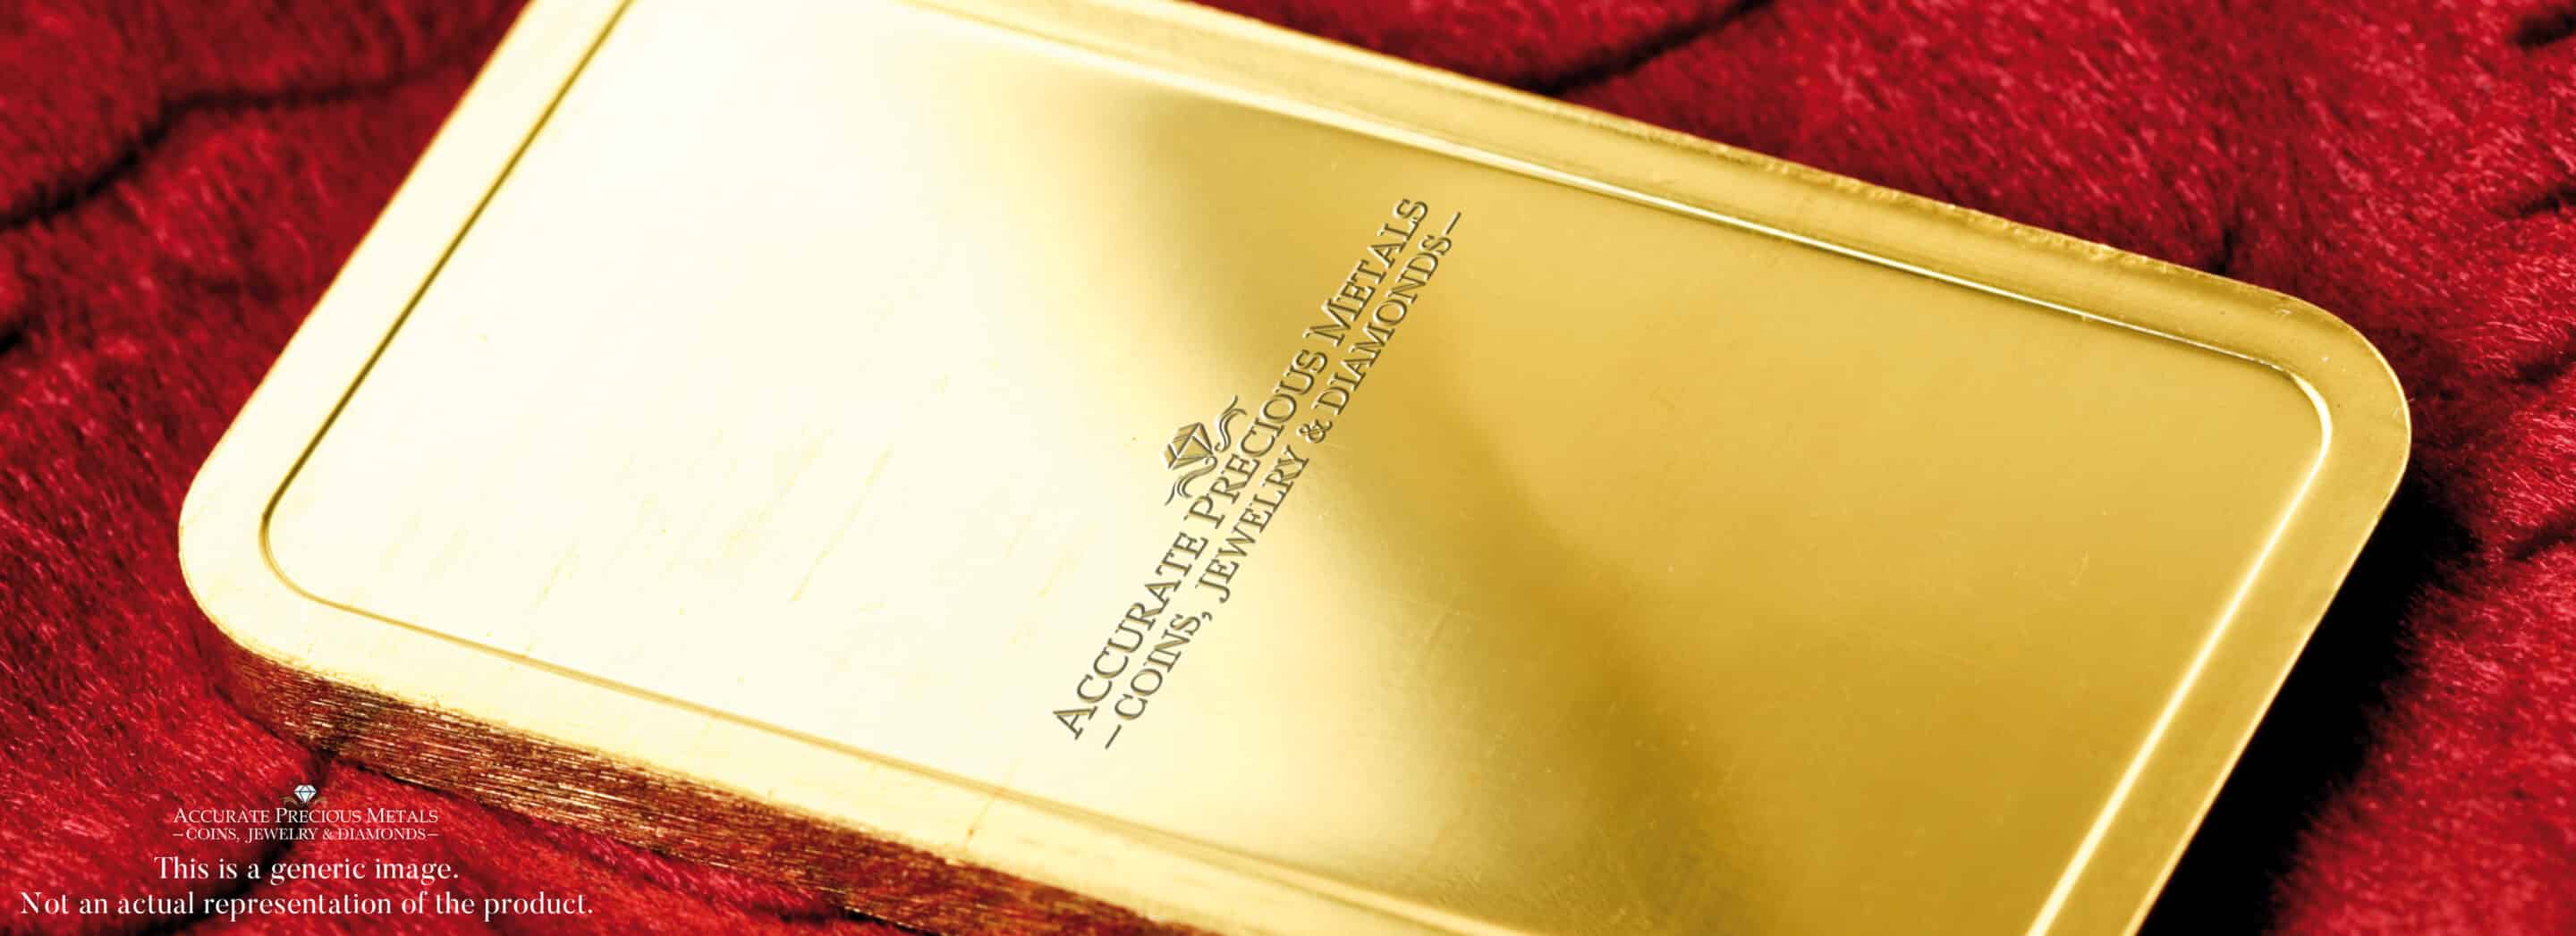 Credit Suisse 1/4 oz Gold Bar - Pure Excellence in Precious Metal Investment